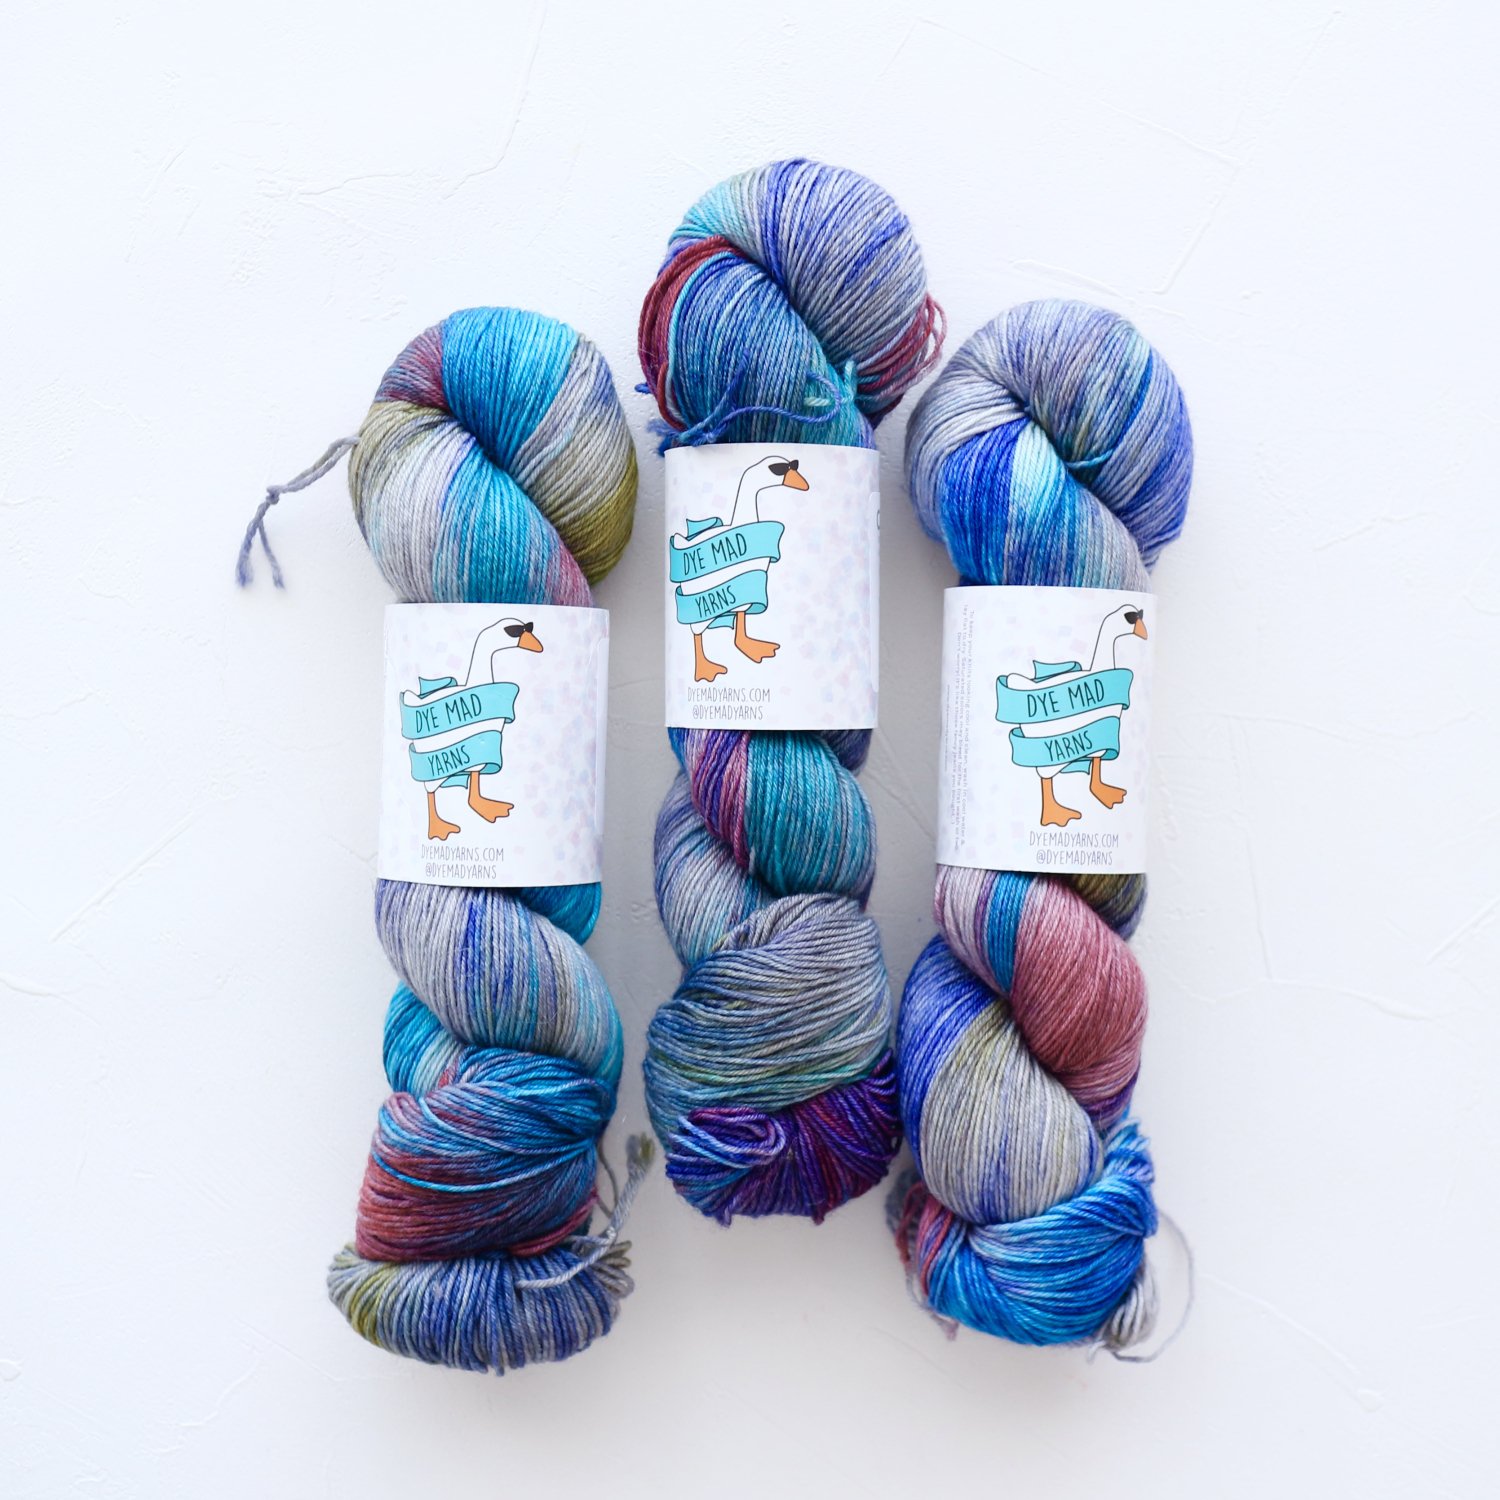 【Dye Mad Yarns】<br>Chester Sock<br>Wreck of the Edmund Fitzgerald